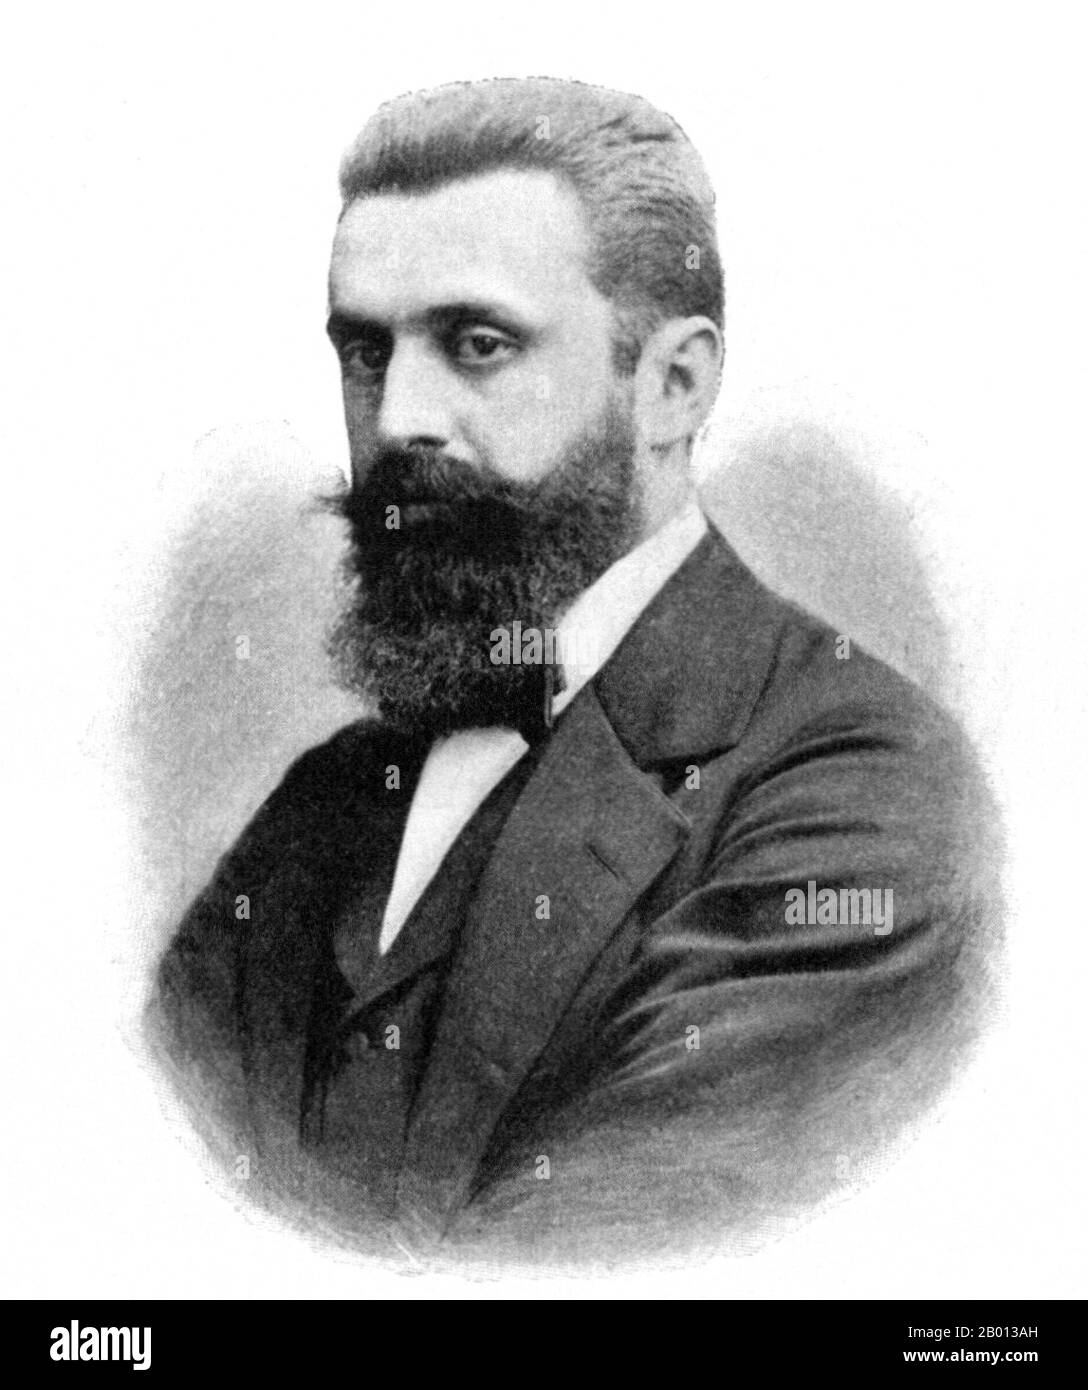 Austria/Israel: Theodor Herzl (May 2, 1860 – July 3, 1904), Austrian journalist and Zionist. Photograph by Carl Pietzner (1853-1927), 2 January 1897.  Theodor Herzl (1860-1904), born Benjamin Ze’ev Herzl, also known as in Hebrew as Hozeh HaMedinah, or 'Visionary of the State' was an Austro-Hungarian journalist and the father of modern political Zionism and in effect the State of Israel. He was born and died in Austria; in 1949 his remains were moved from Vienna to be reburied on Mount Herzl in Jerusalem. Stock Photo